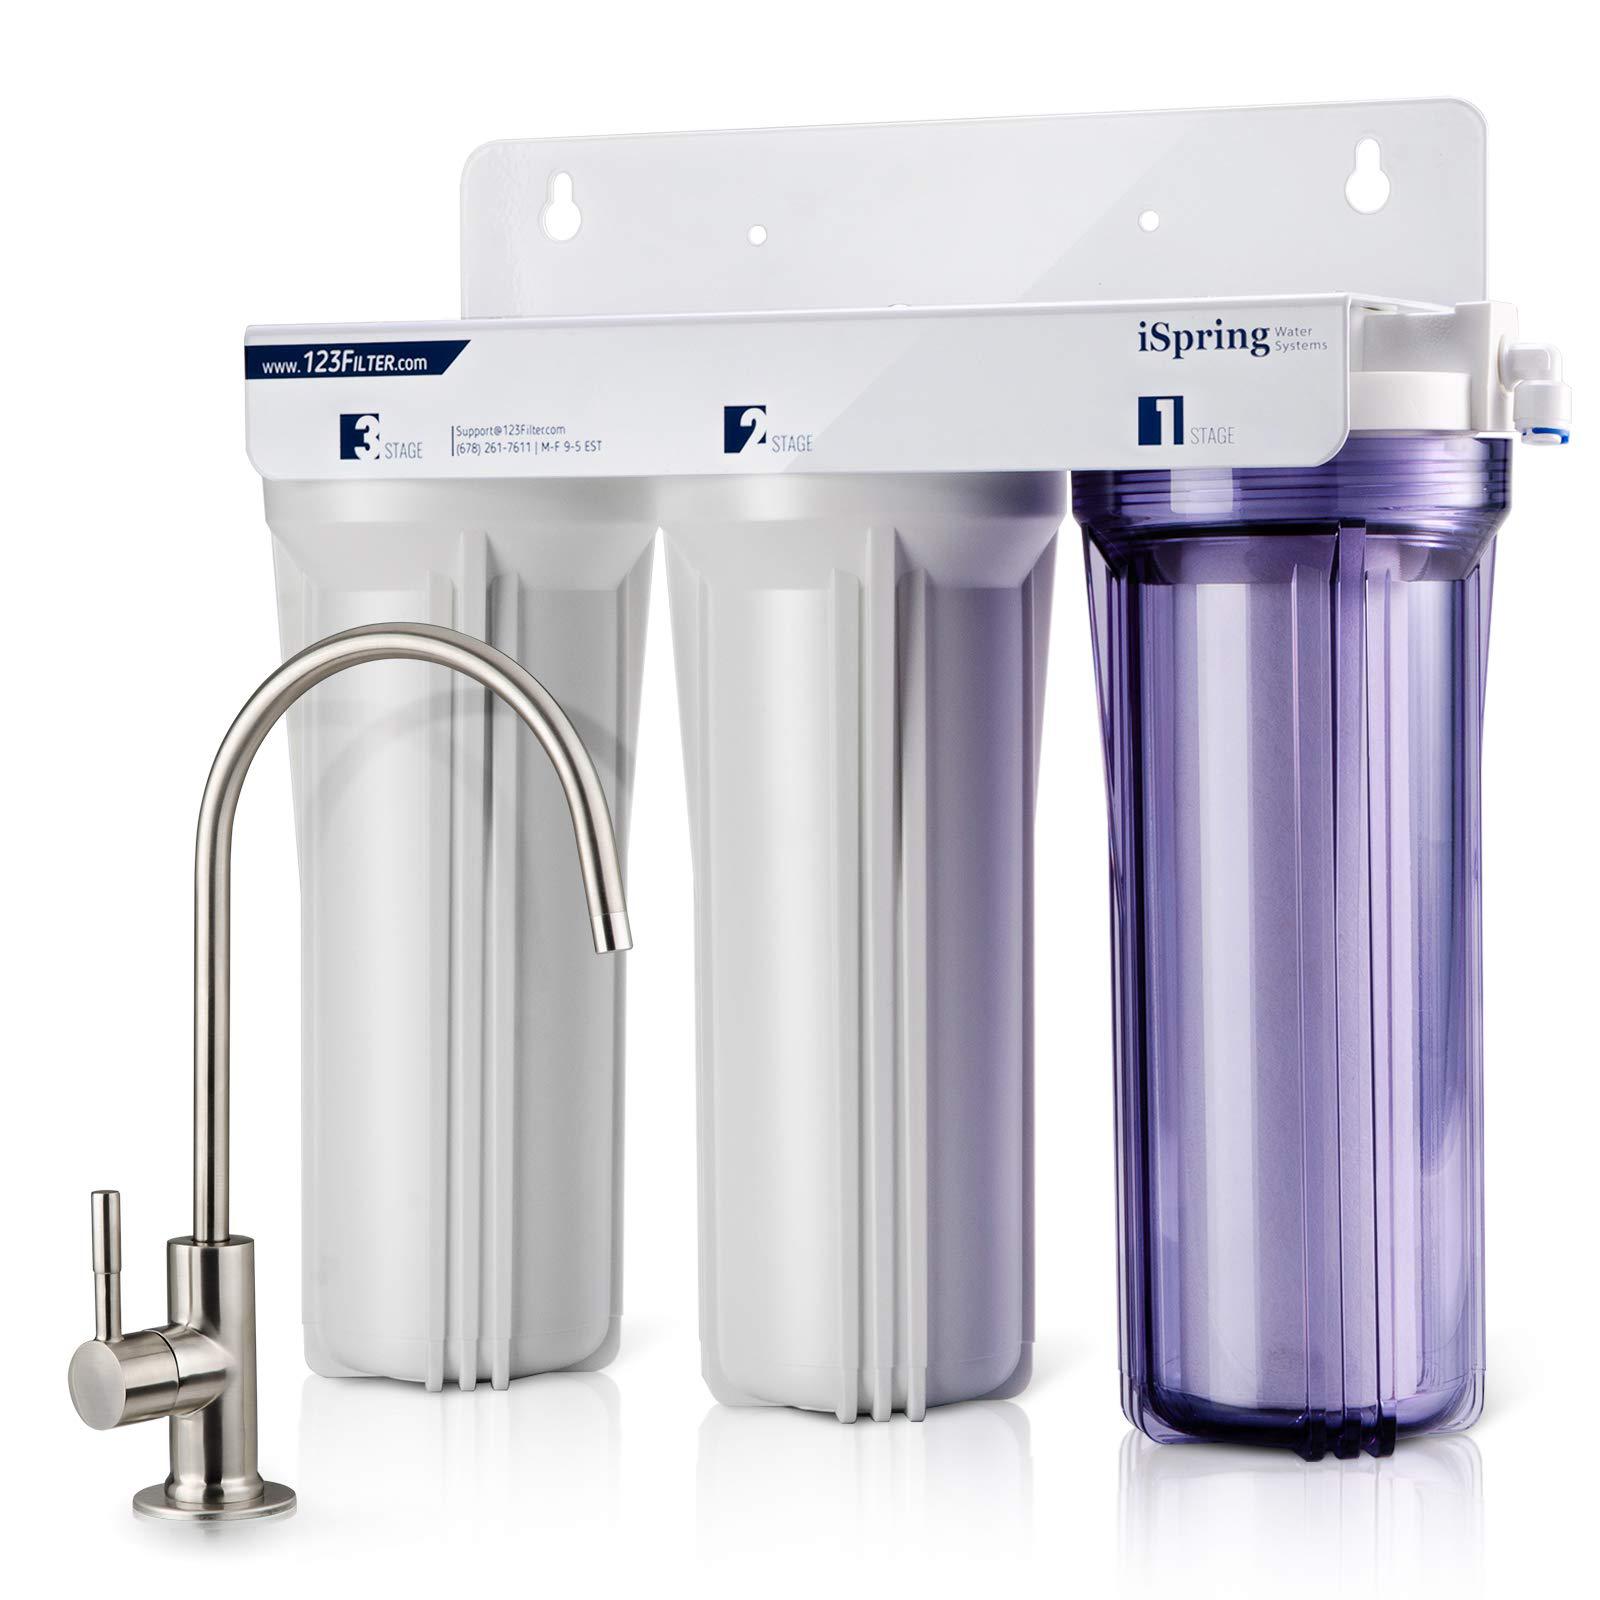 ispring us31 classic 3-stage under sink water filtration system for drinking, tankless, high capacity, sediment + carbon + ca